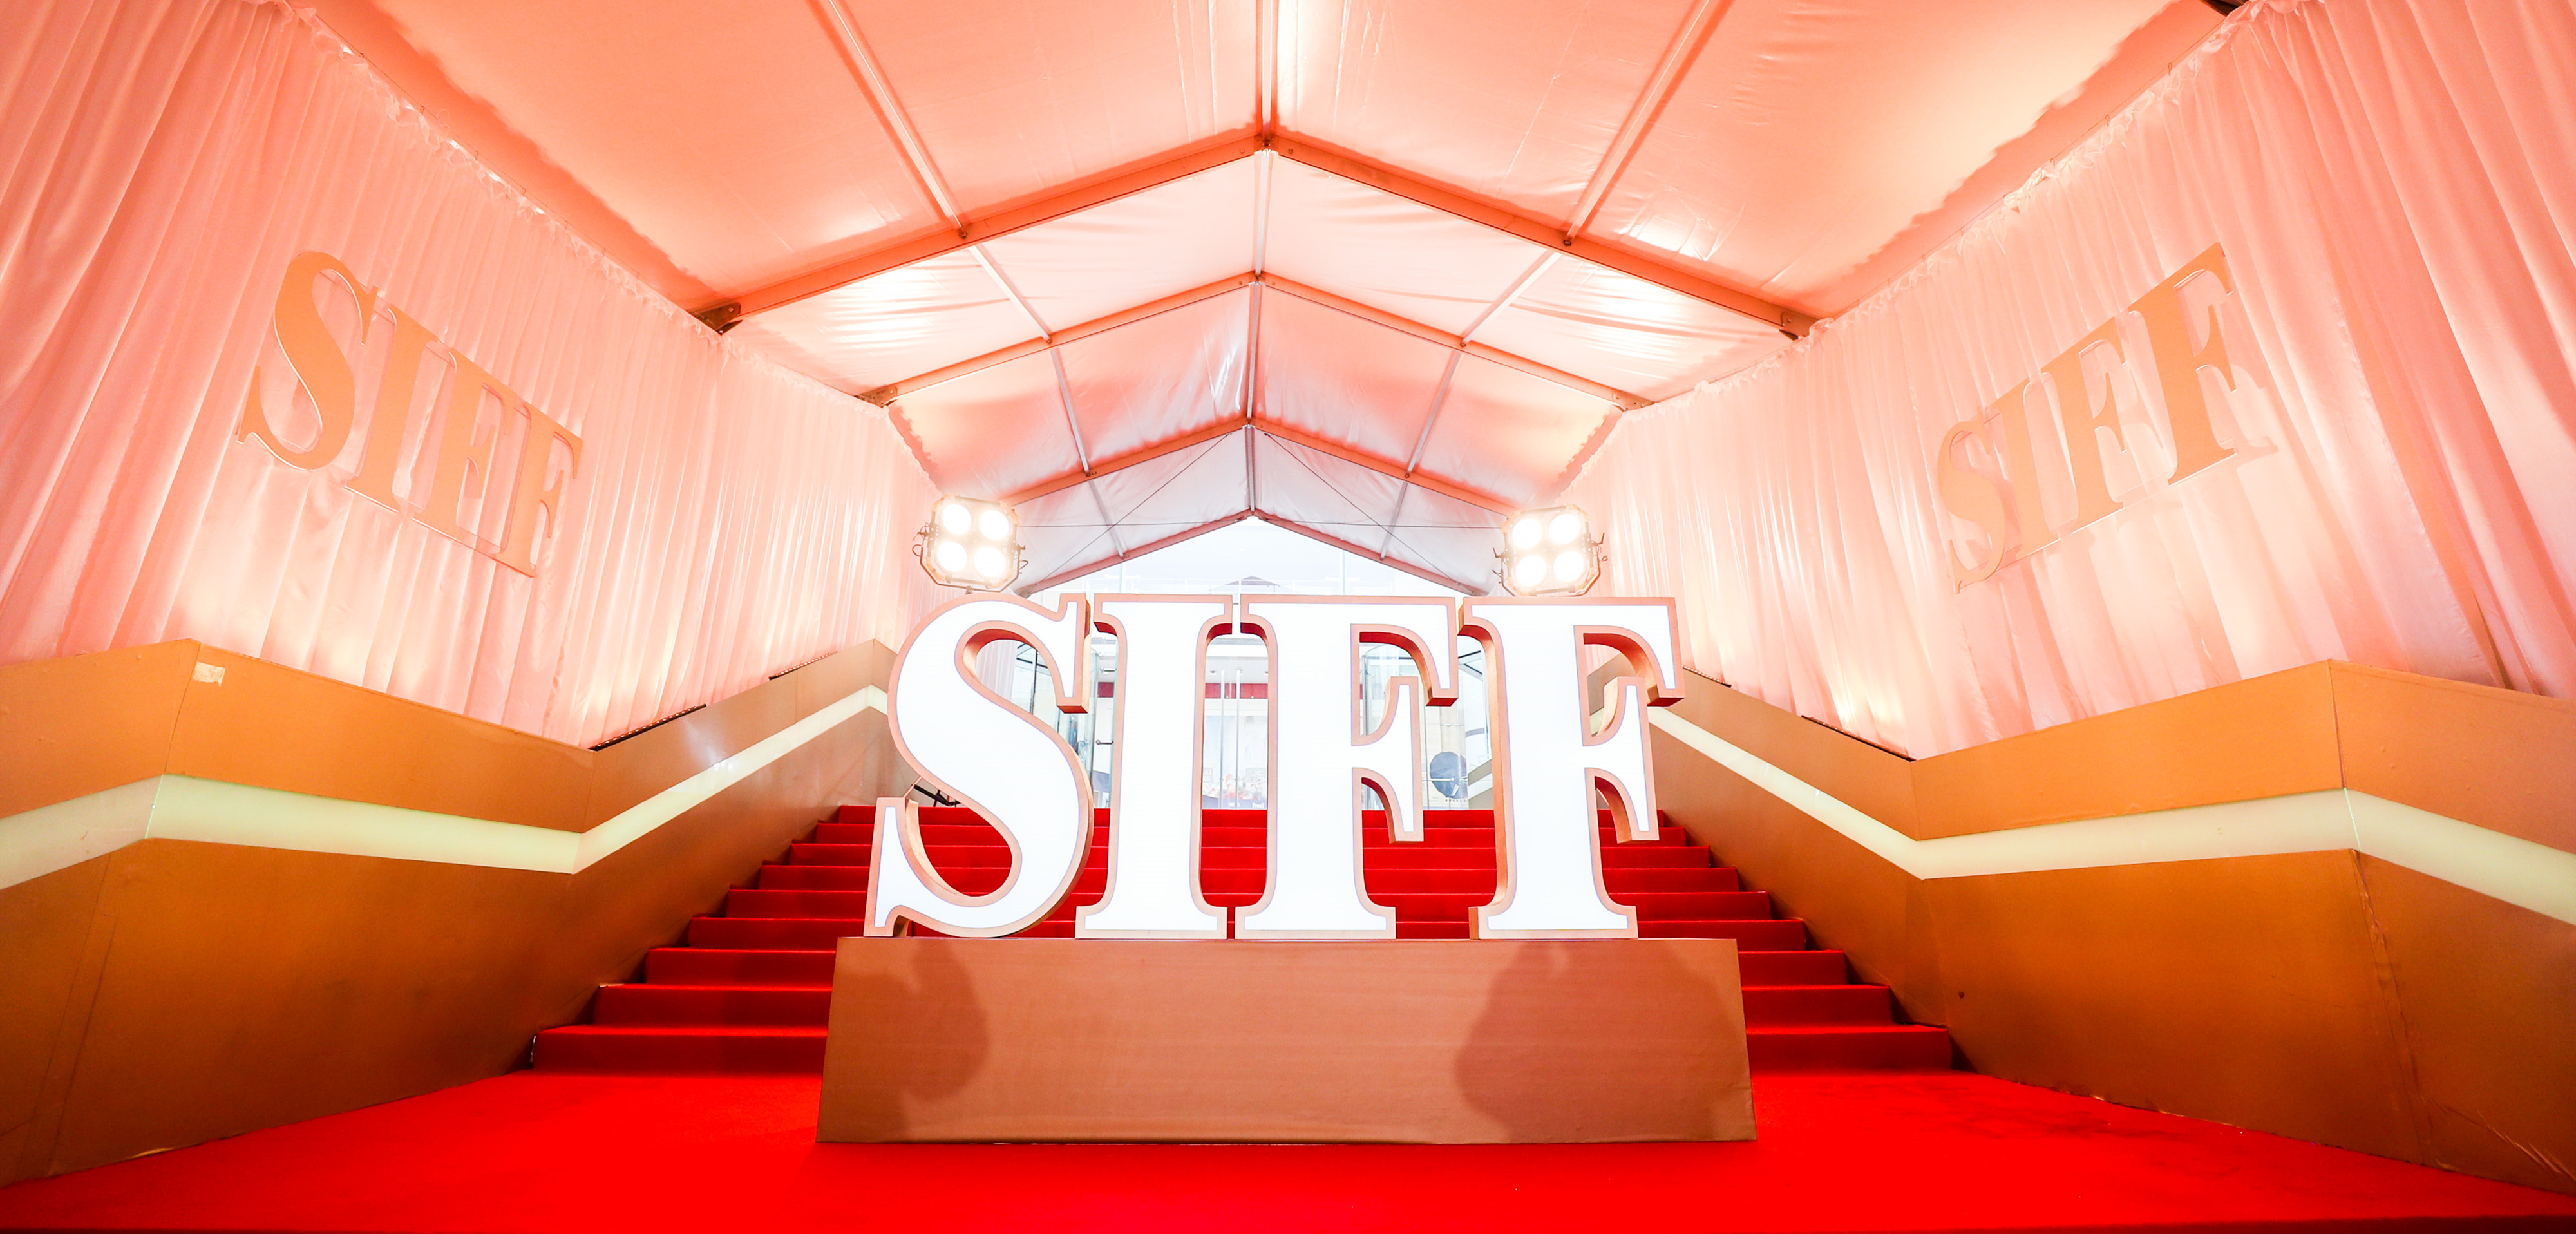 The 26th SIFF to Kick Off on June 14